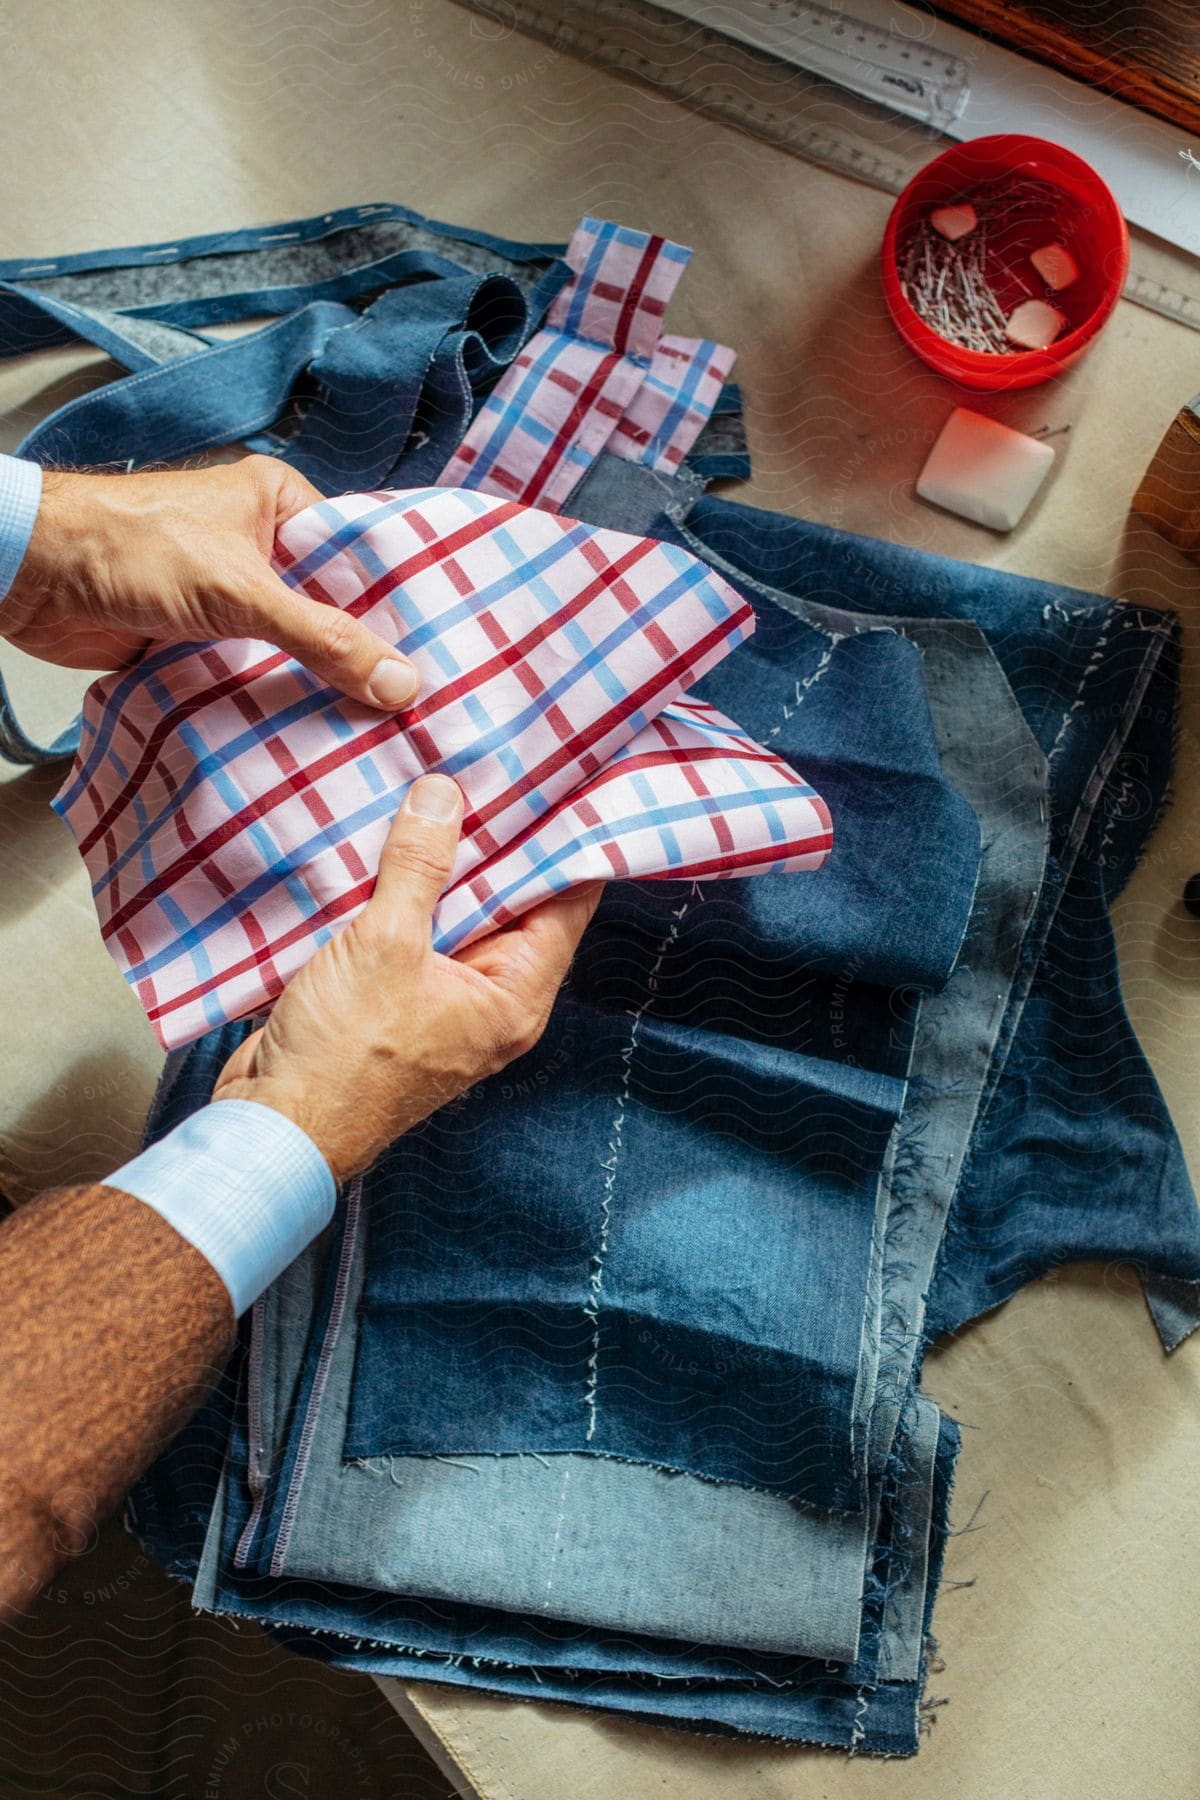 Clothing designer holding red white and blue fabric over strips of denim